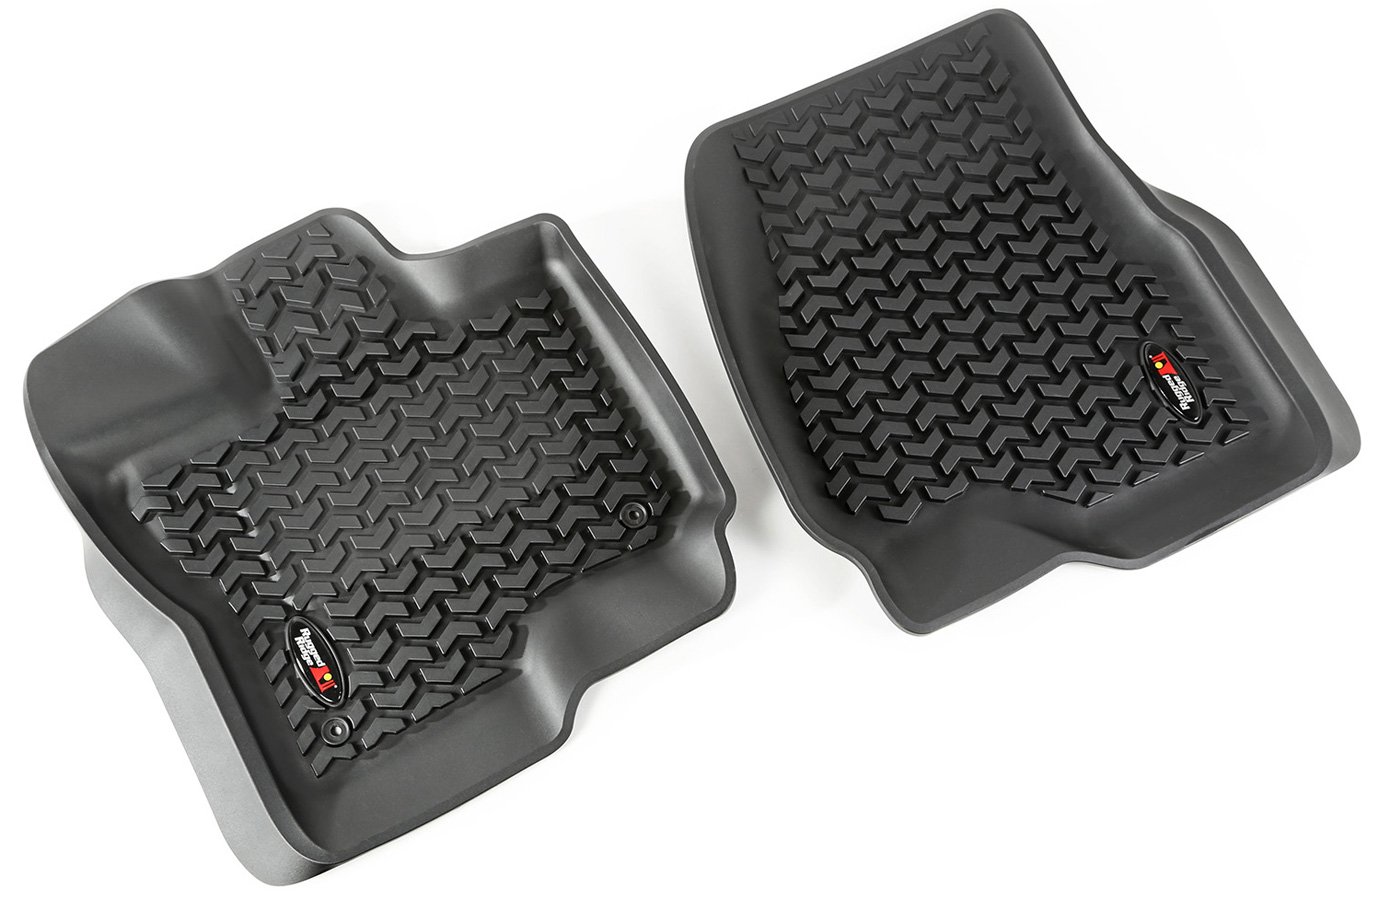 Trapper's Peak Automotive Floor Mats Solid ClimaProof for all weather  protection Universal Fit Trimmable Heavy Duty